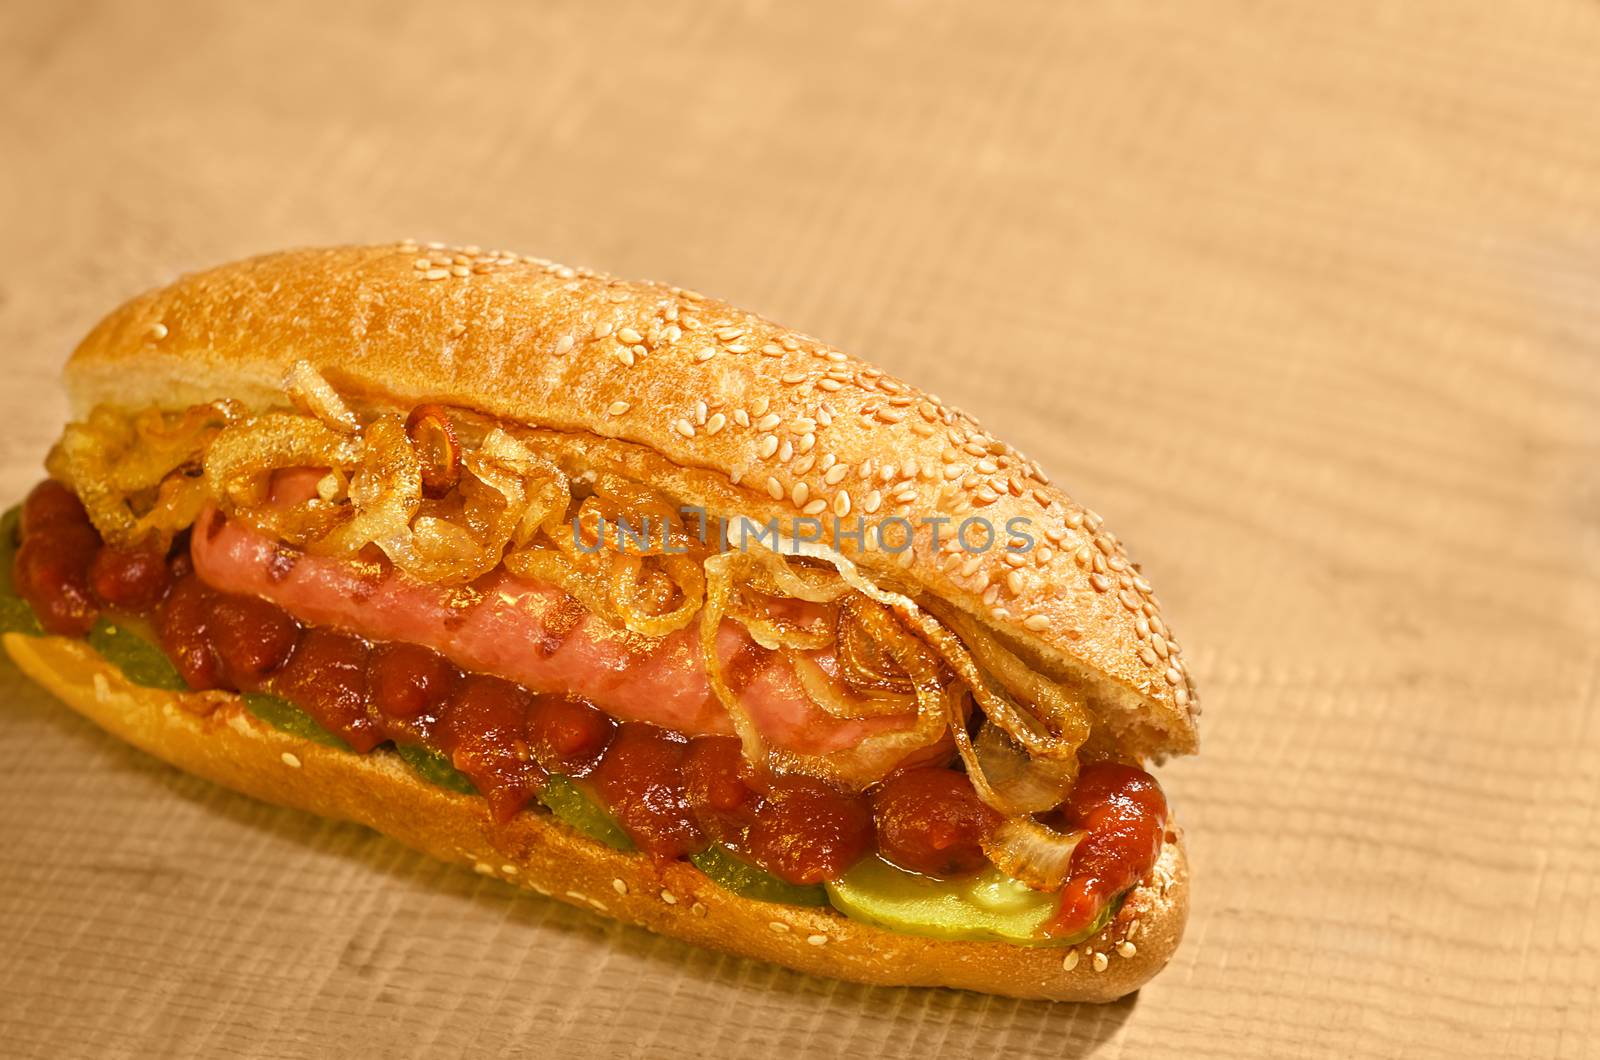 Hot dog with pickles, ketchup and grilled onions, laying on a Board. Warm color and bokeh.